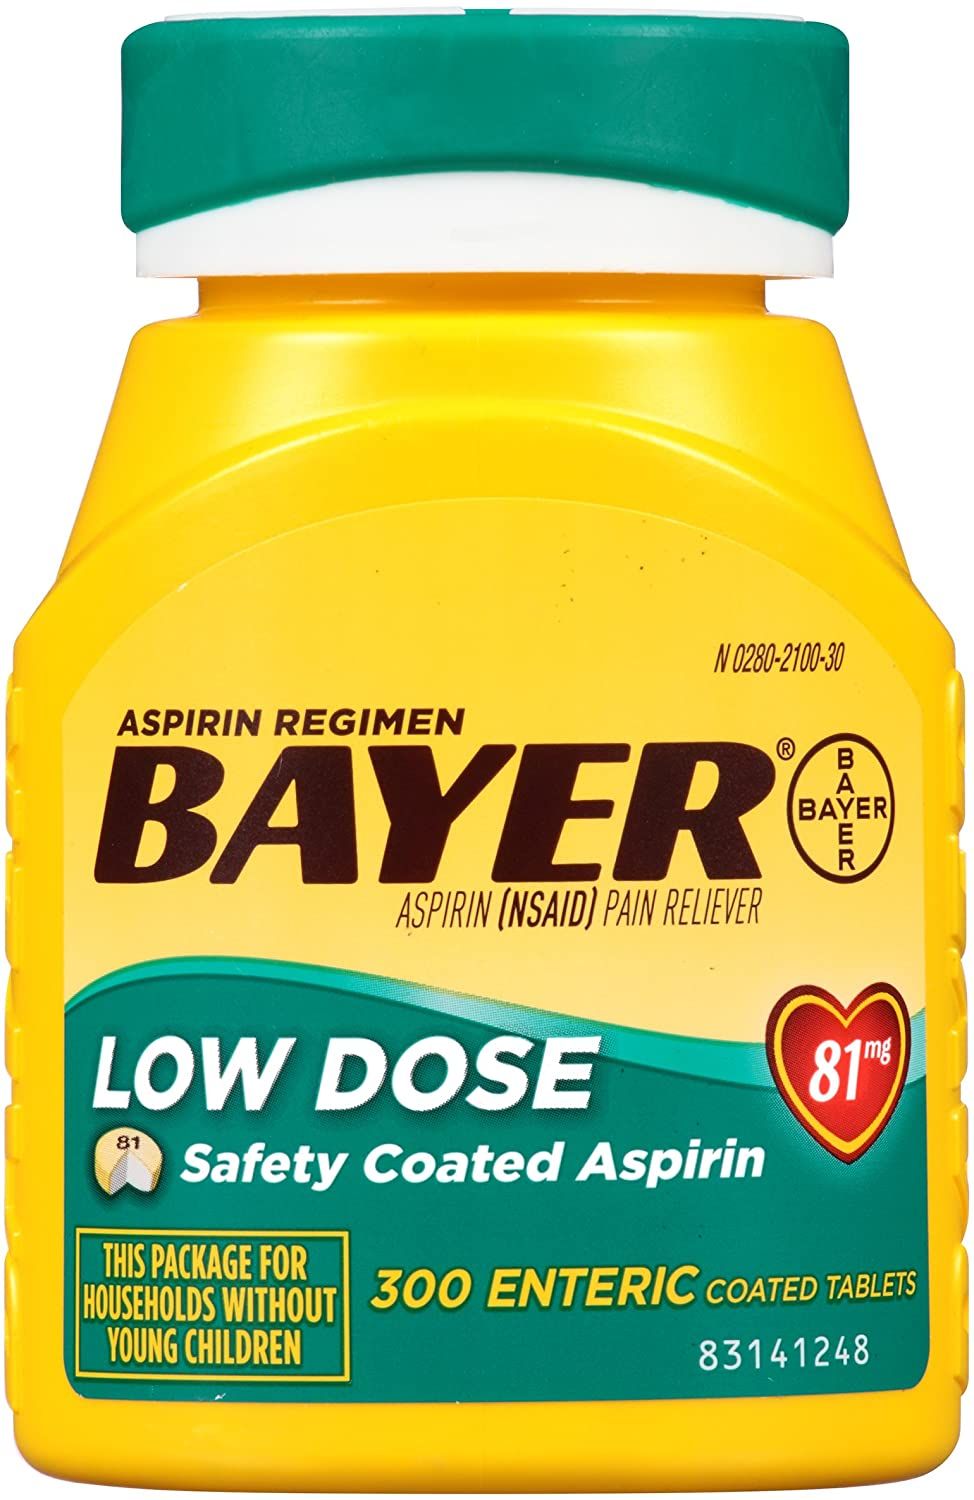 Bayer Low Dose Safety Coated Aspirin, 81 mg, Enteric Caplets - 300 ct